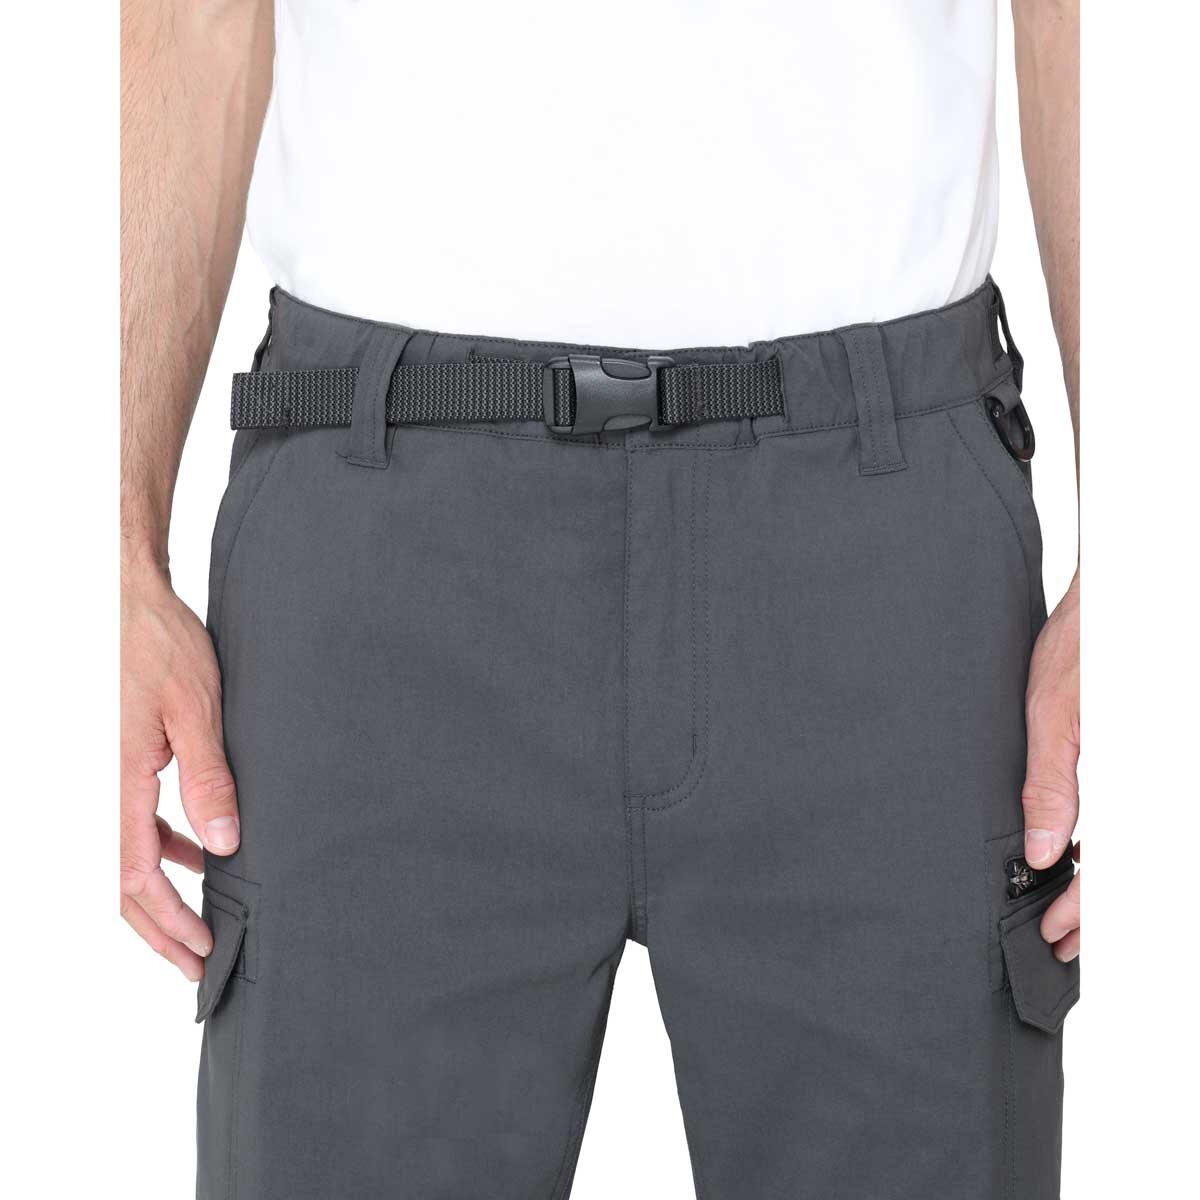 BC Clothing Men's Convertible Pant in Charcoal & 4 Sizes & 2 Lengths